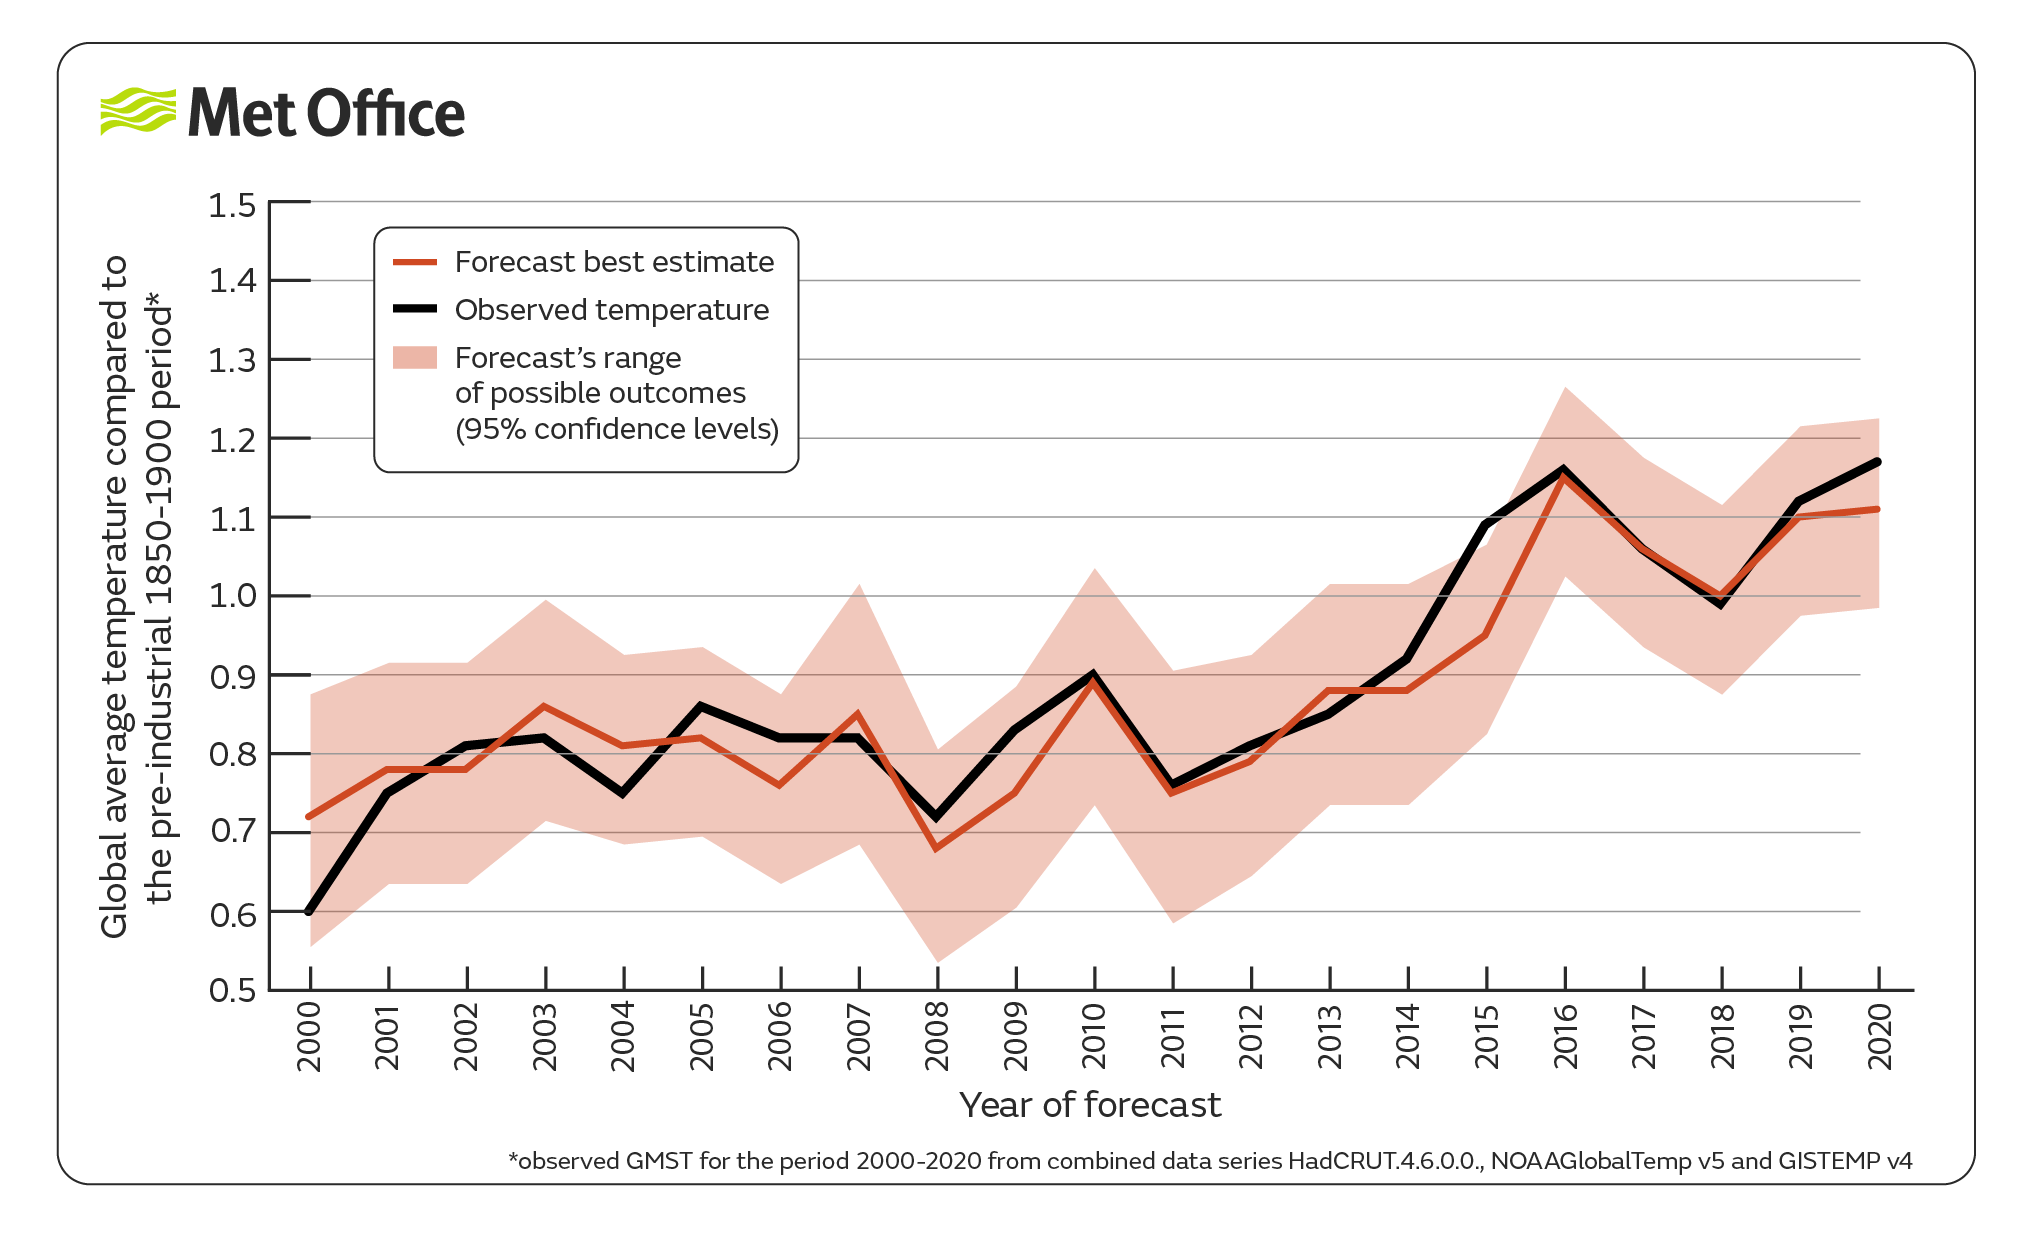 Graph showing the forecast best estimate compared to the observed forecast temperature, from 2000 to 2020.